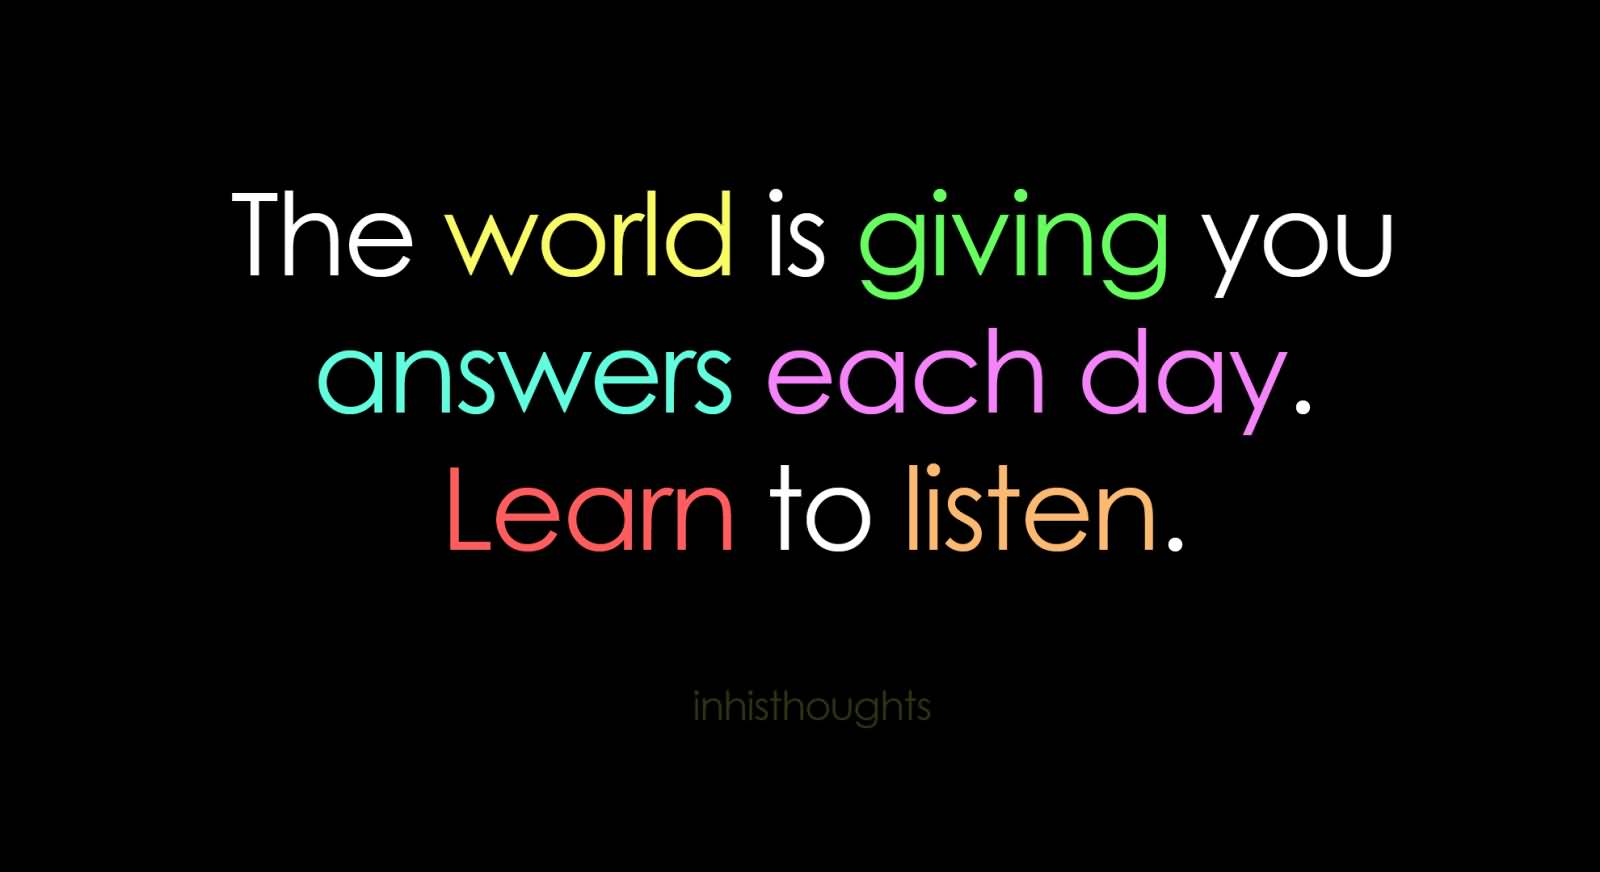 The world is giving you answers each day. Learn to listen